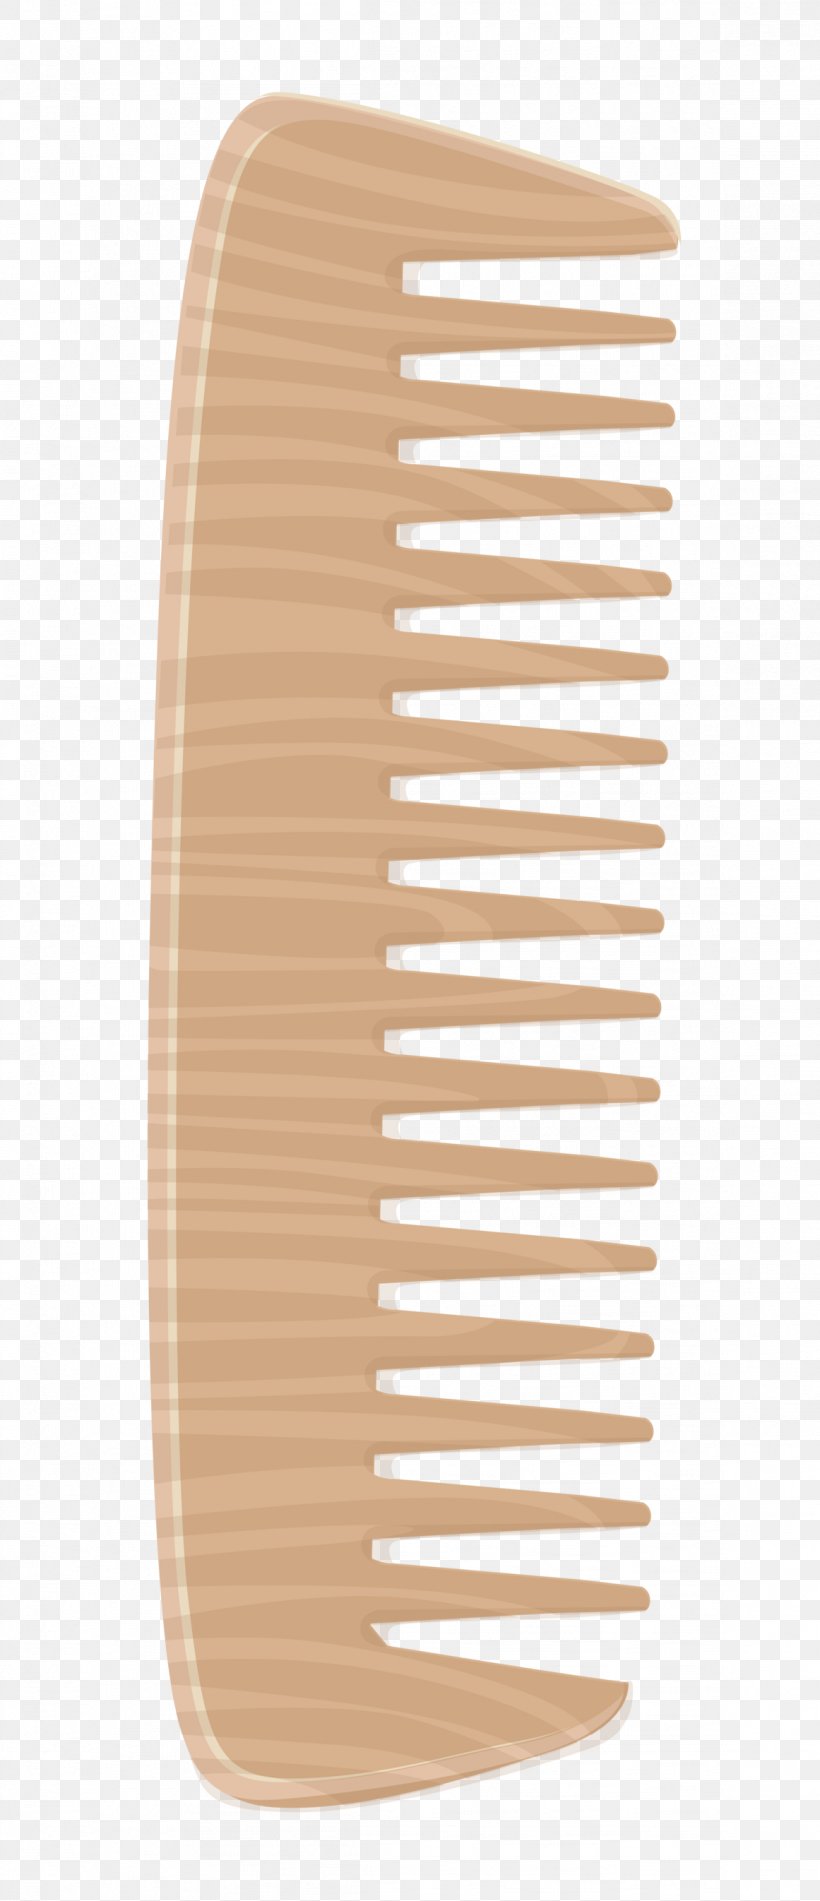 Comb Hair Beauty Parlour Clip Art, PNG, 1161x2692px, Comb, Barber, Beauty Parlour, Brush, Cosmetology Download Free